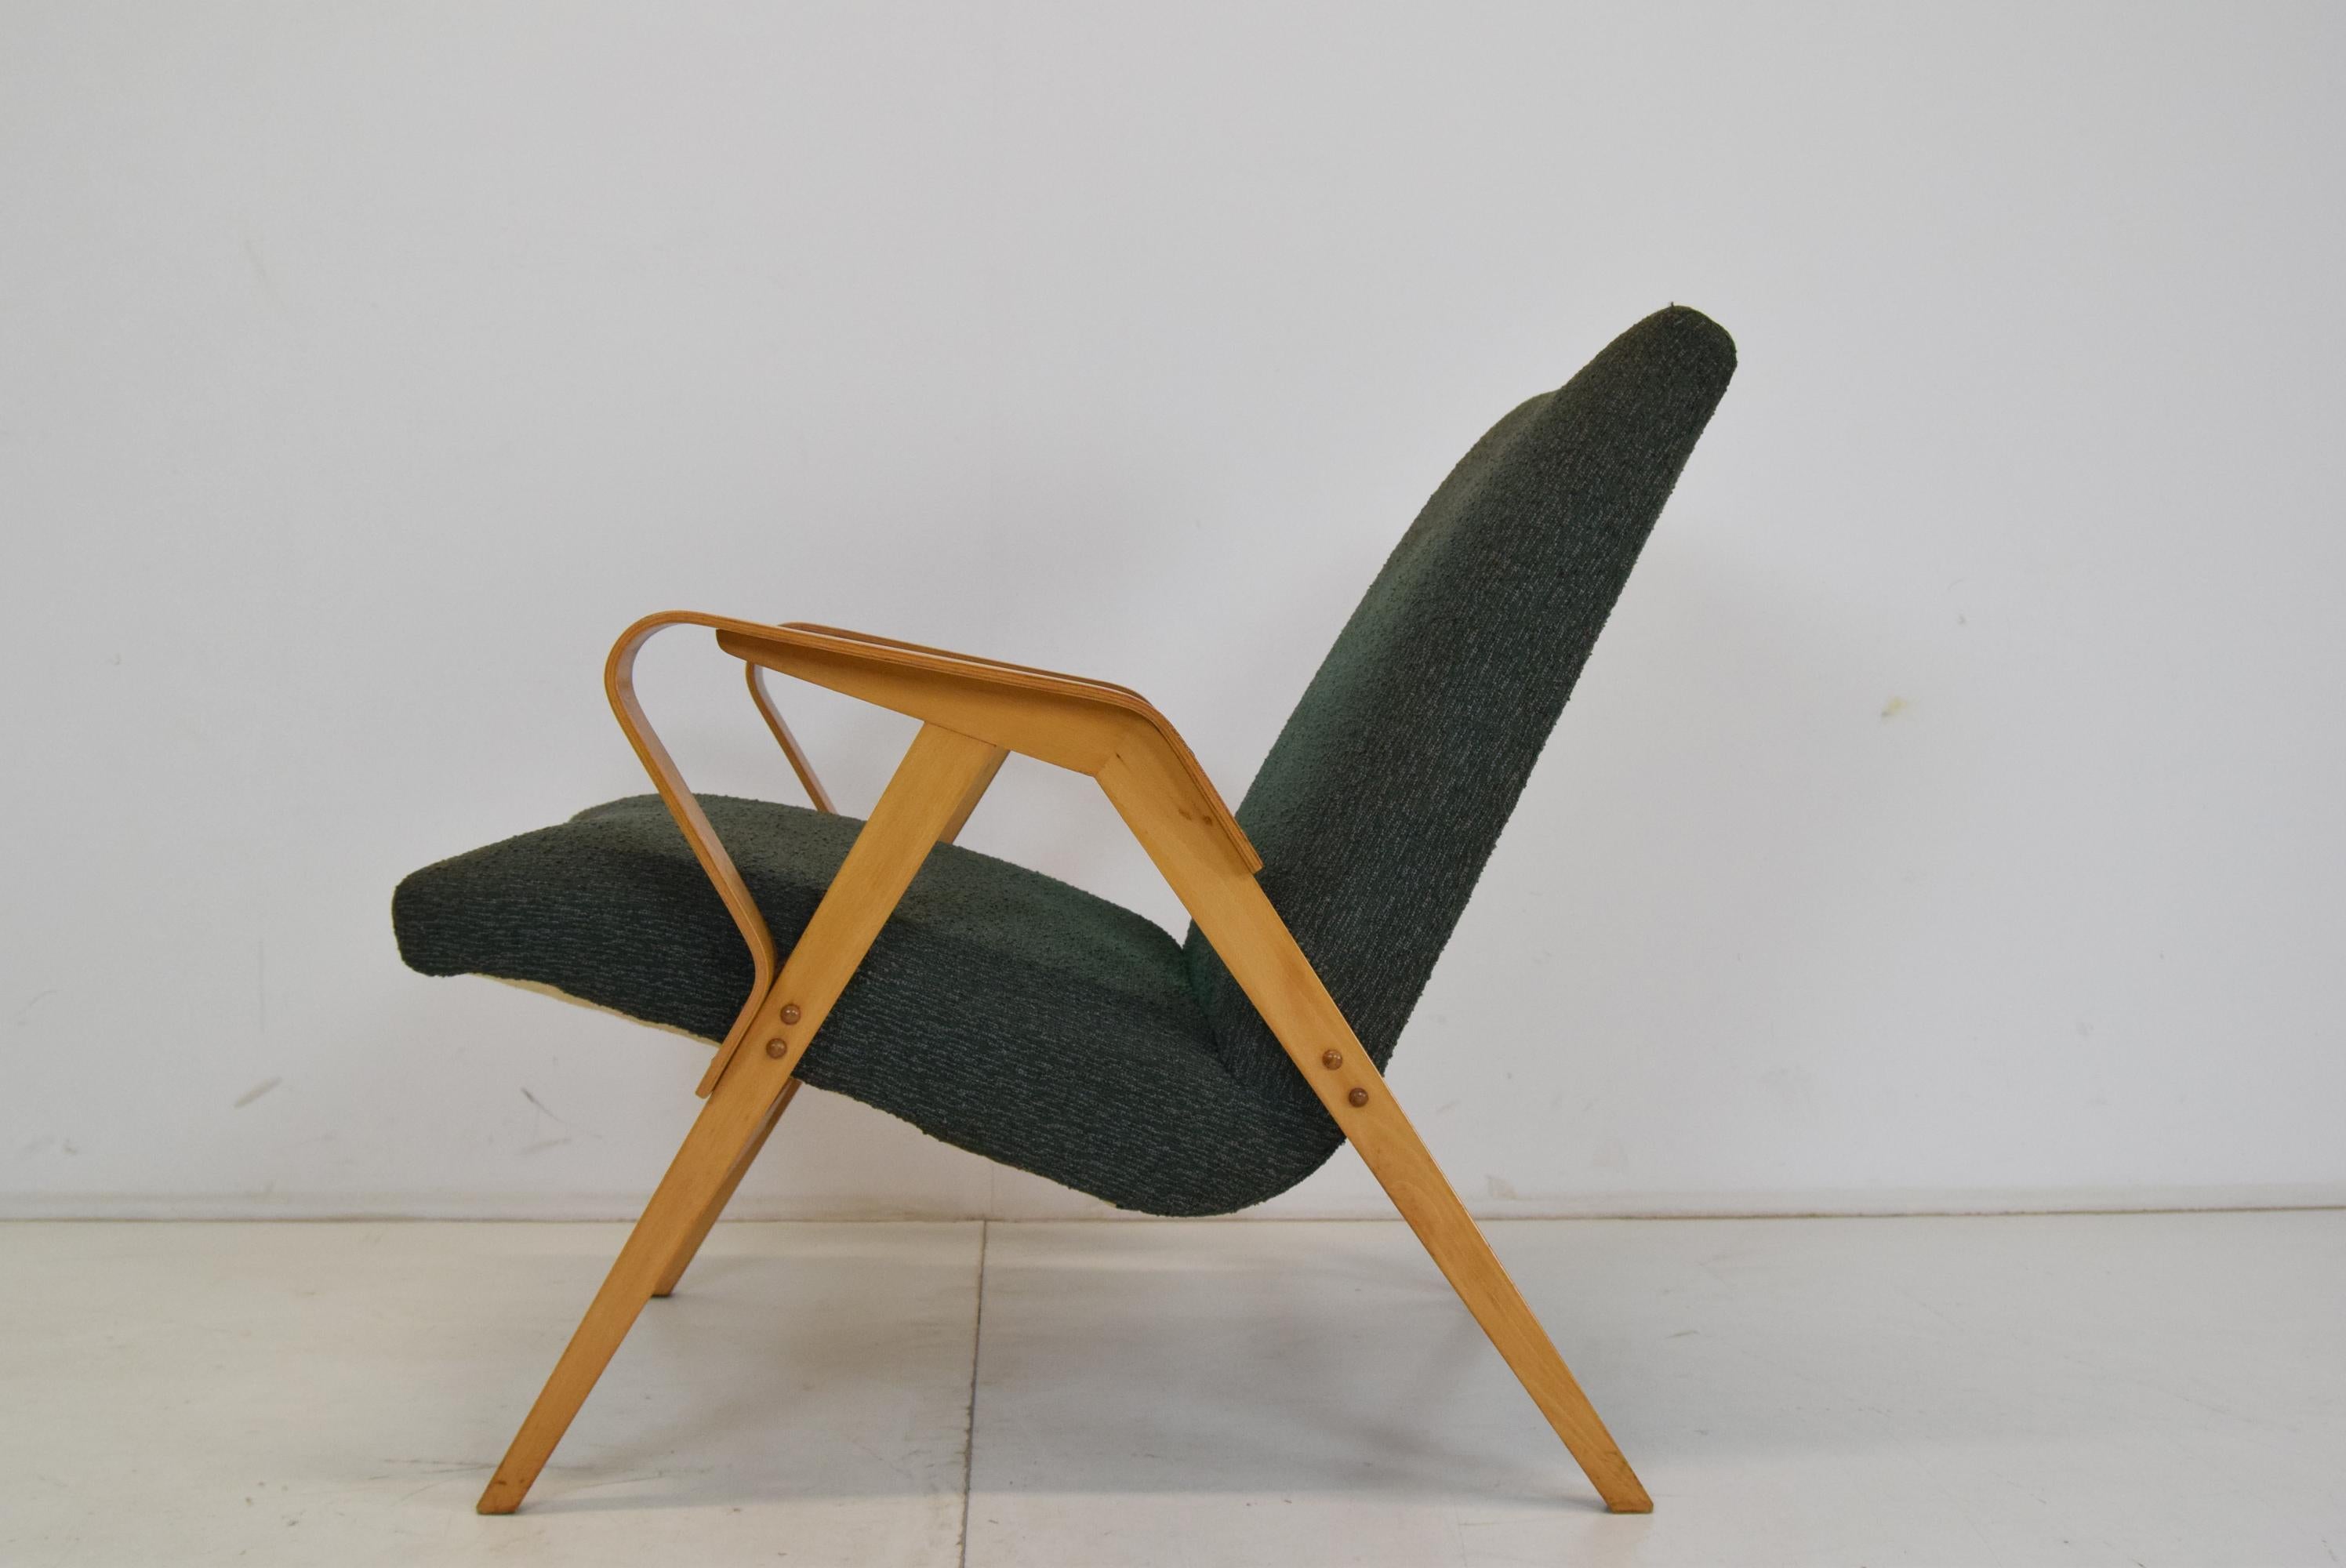 Czech Mid-Century Bentwood Armchair by Frantisek Jirak for Tatra, 1960's For Sale